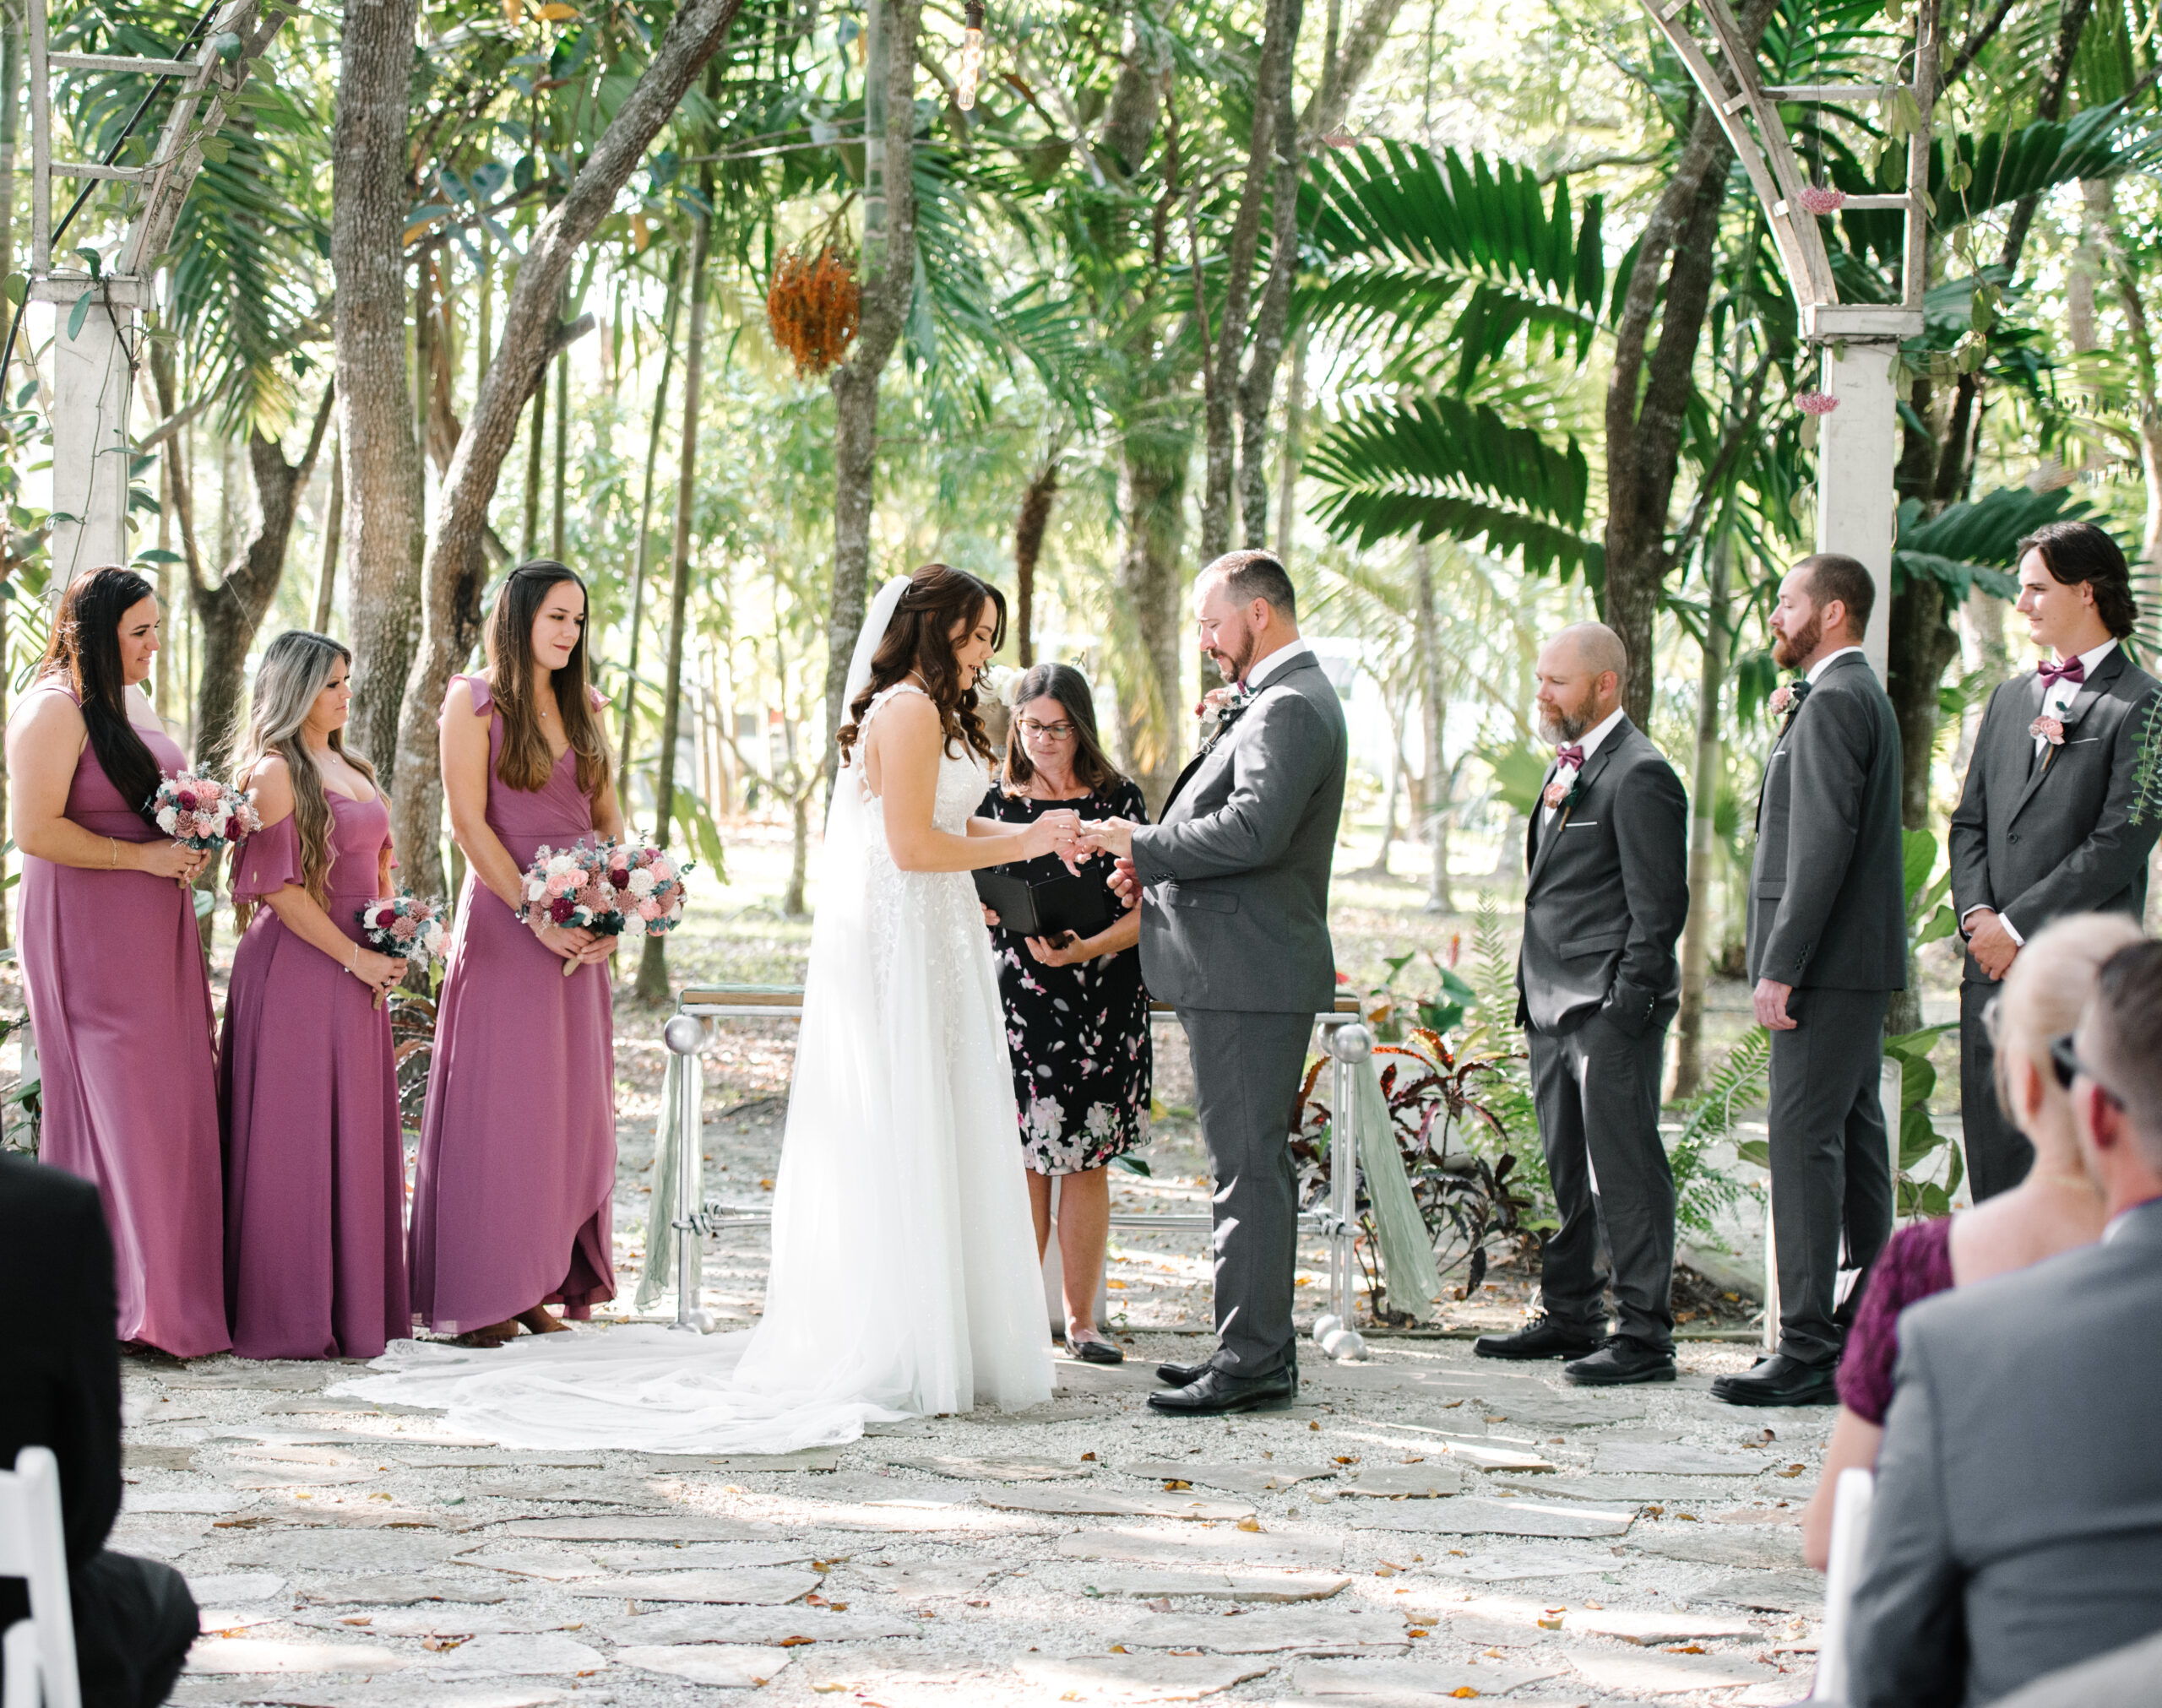 Couple getting married outdoors in a tropical garden setting with brides maids and grooms men